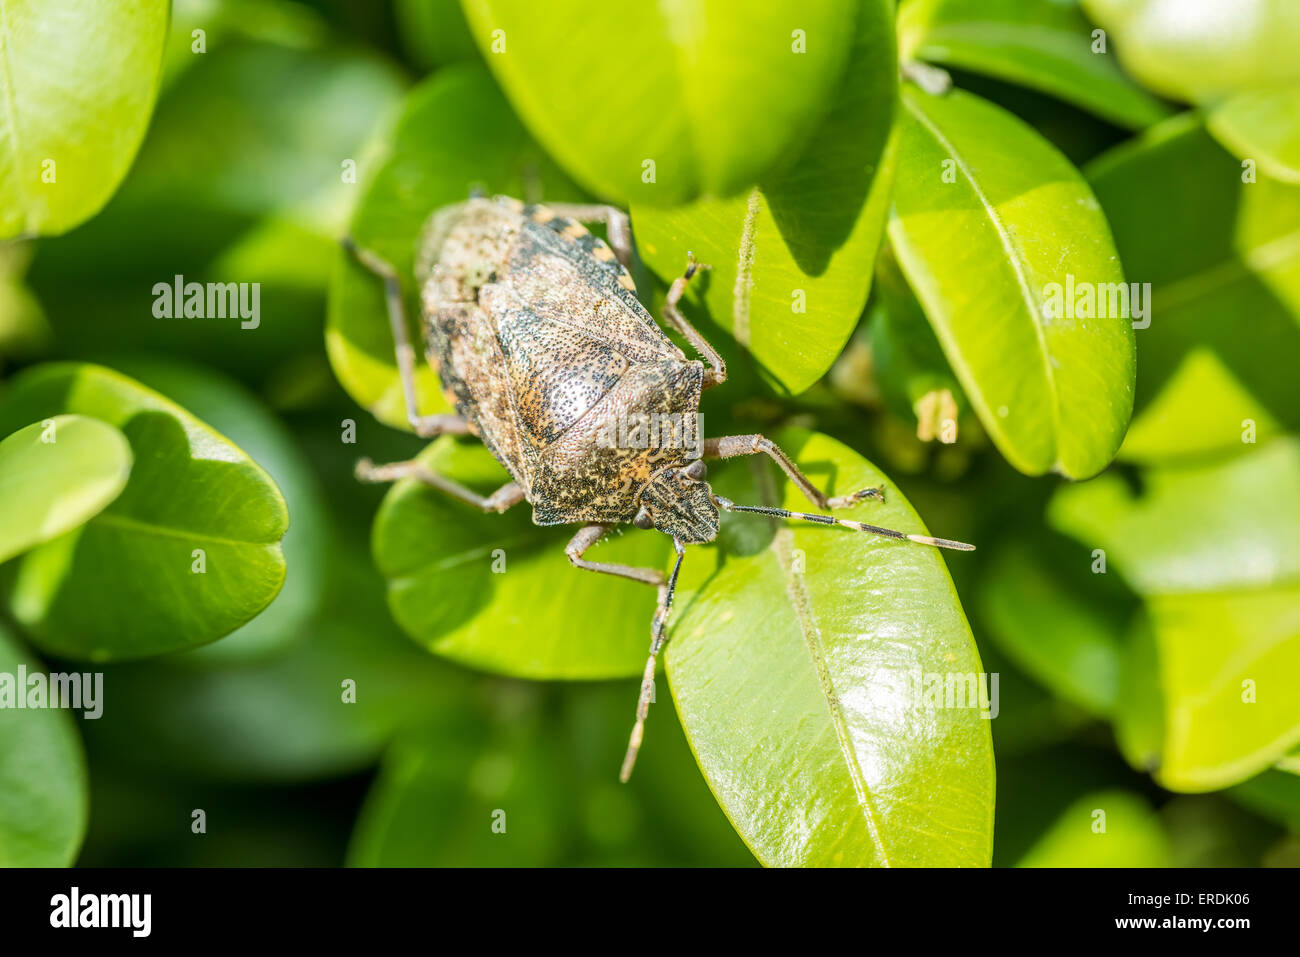 Shield Bug Insect Macro On Green Leaves Stock Photo